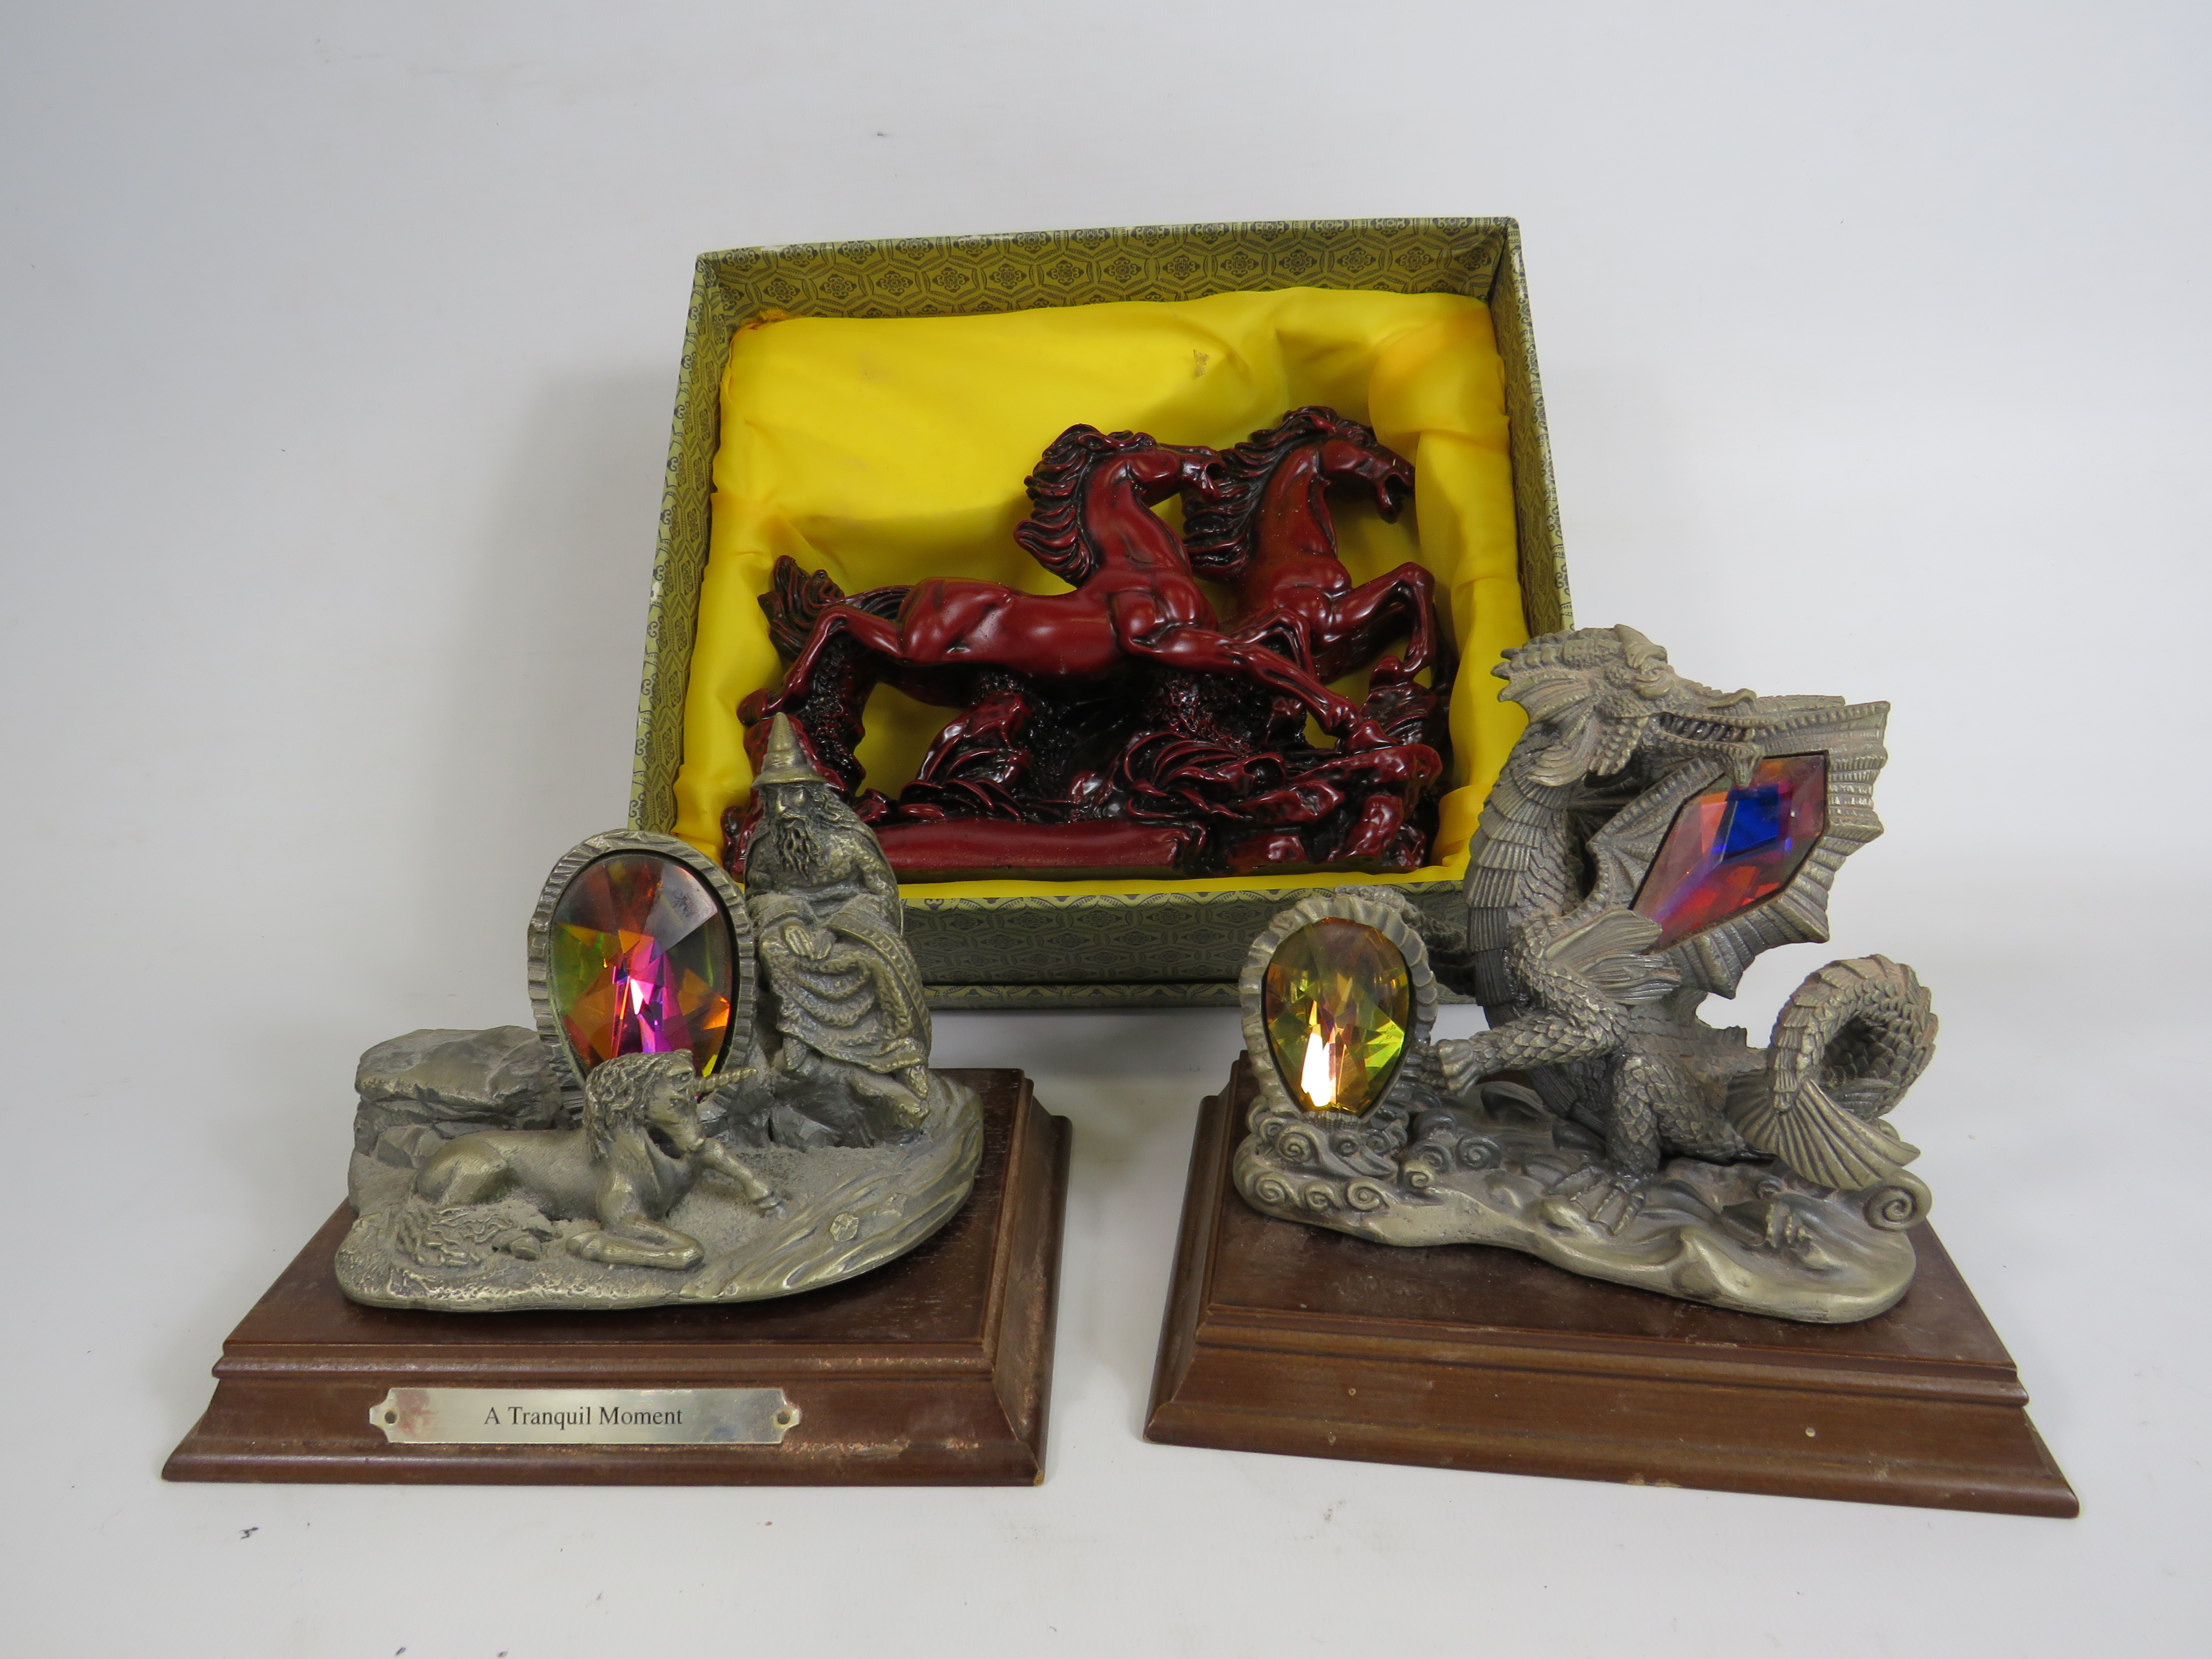 Two Marc locker pewter mythical figurines and a cherry resin galloping horses figurine.